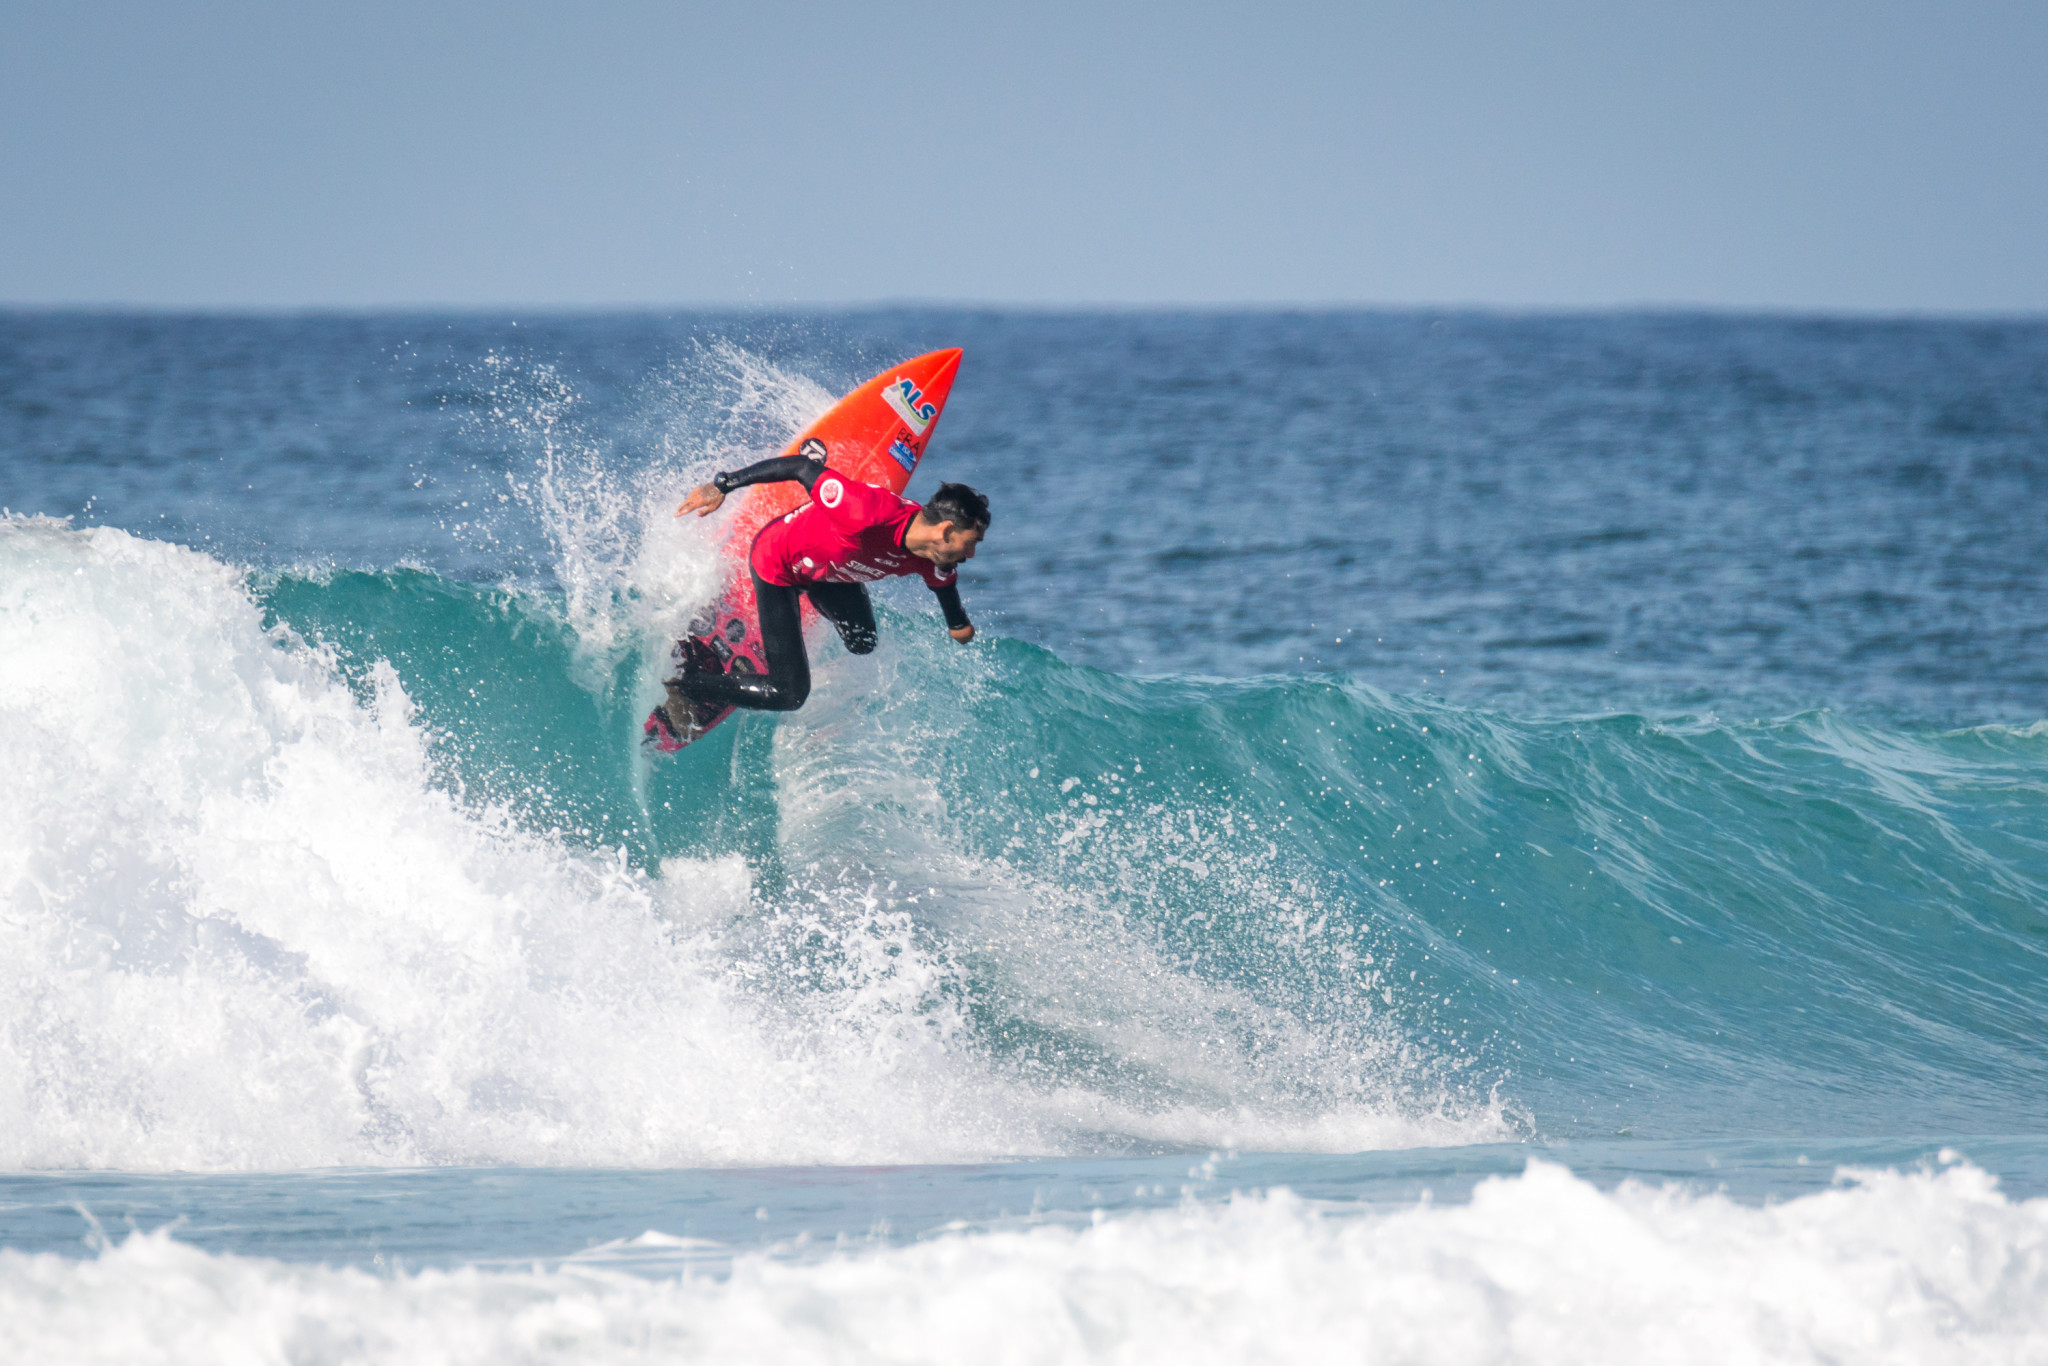 Brazil's Jonathan Borba was among the star performers in the opening day's heats ©ISA/Sean Evans